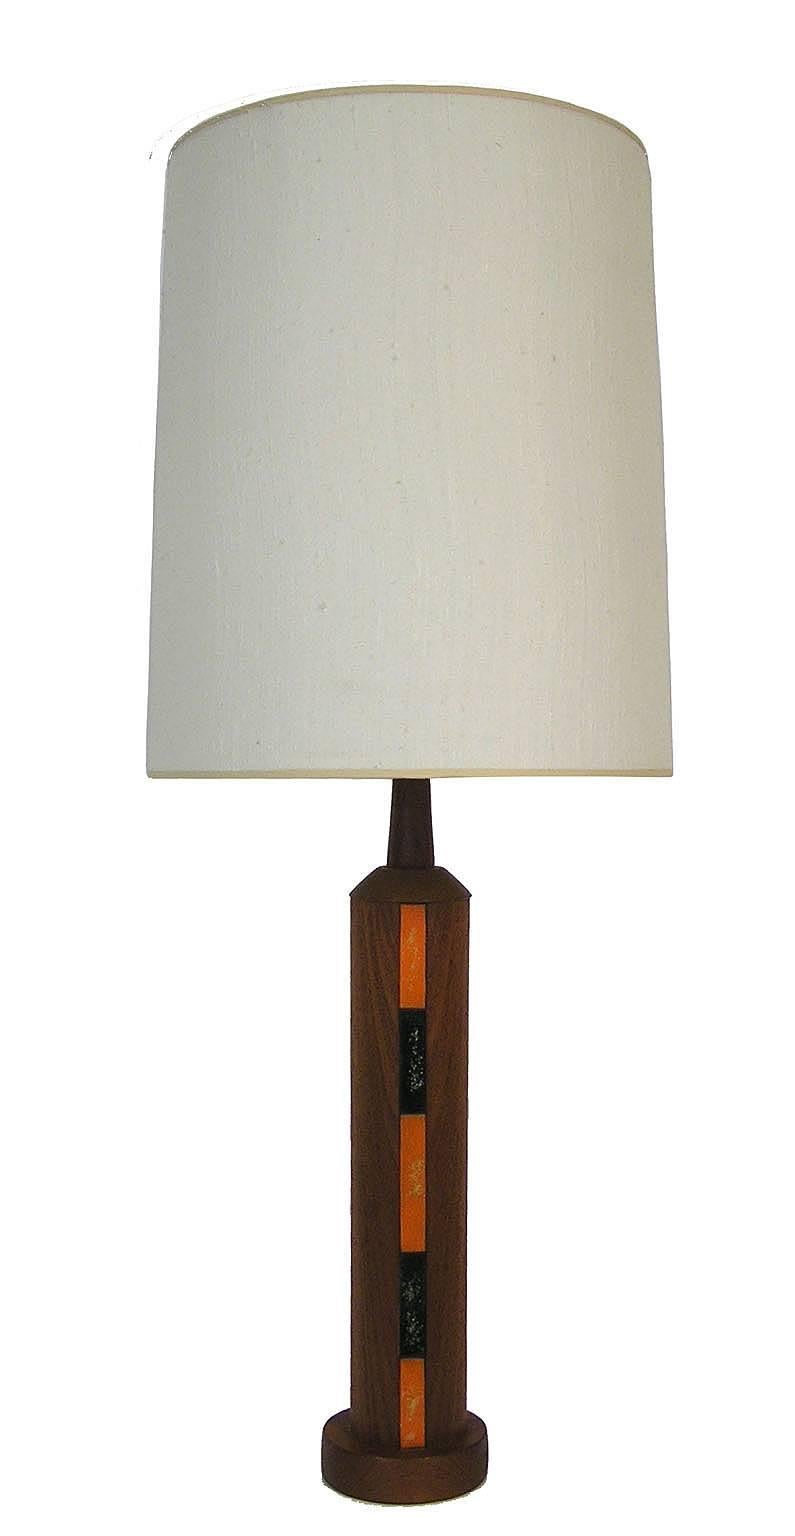 This unique pair of Danish modern solid teak table lamps date from the 1960s. Both lamps feature three striking strips of painted metal applique in black and orange. Each lamp features a three way tri-light switch, milk glass reflector and a raw